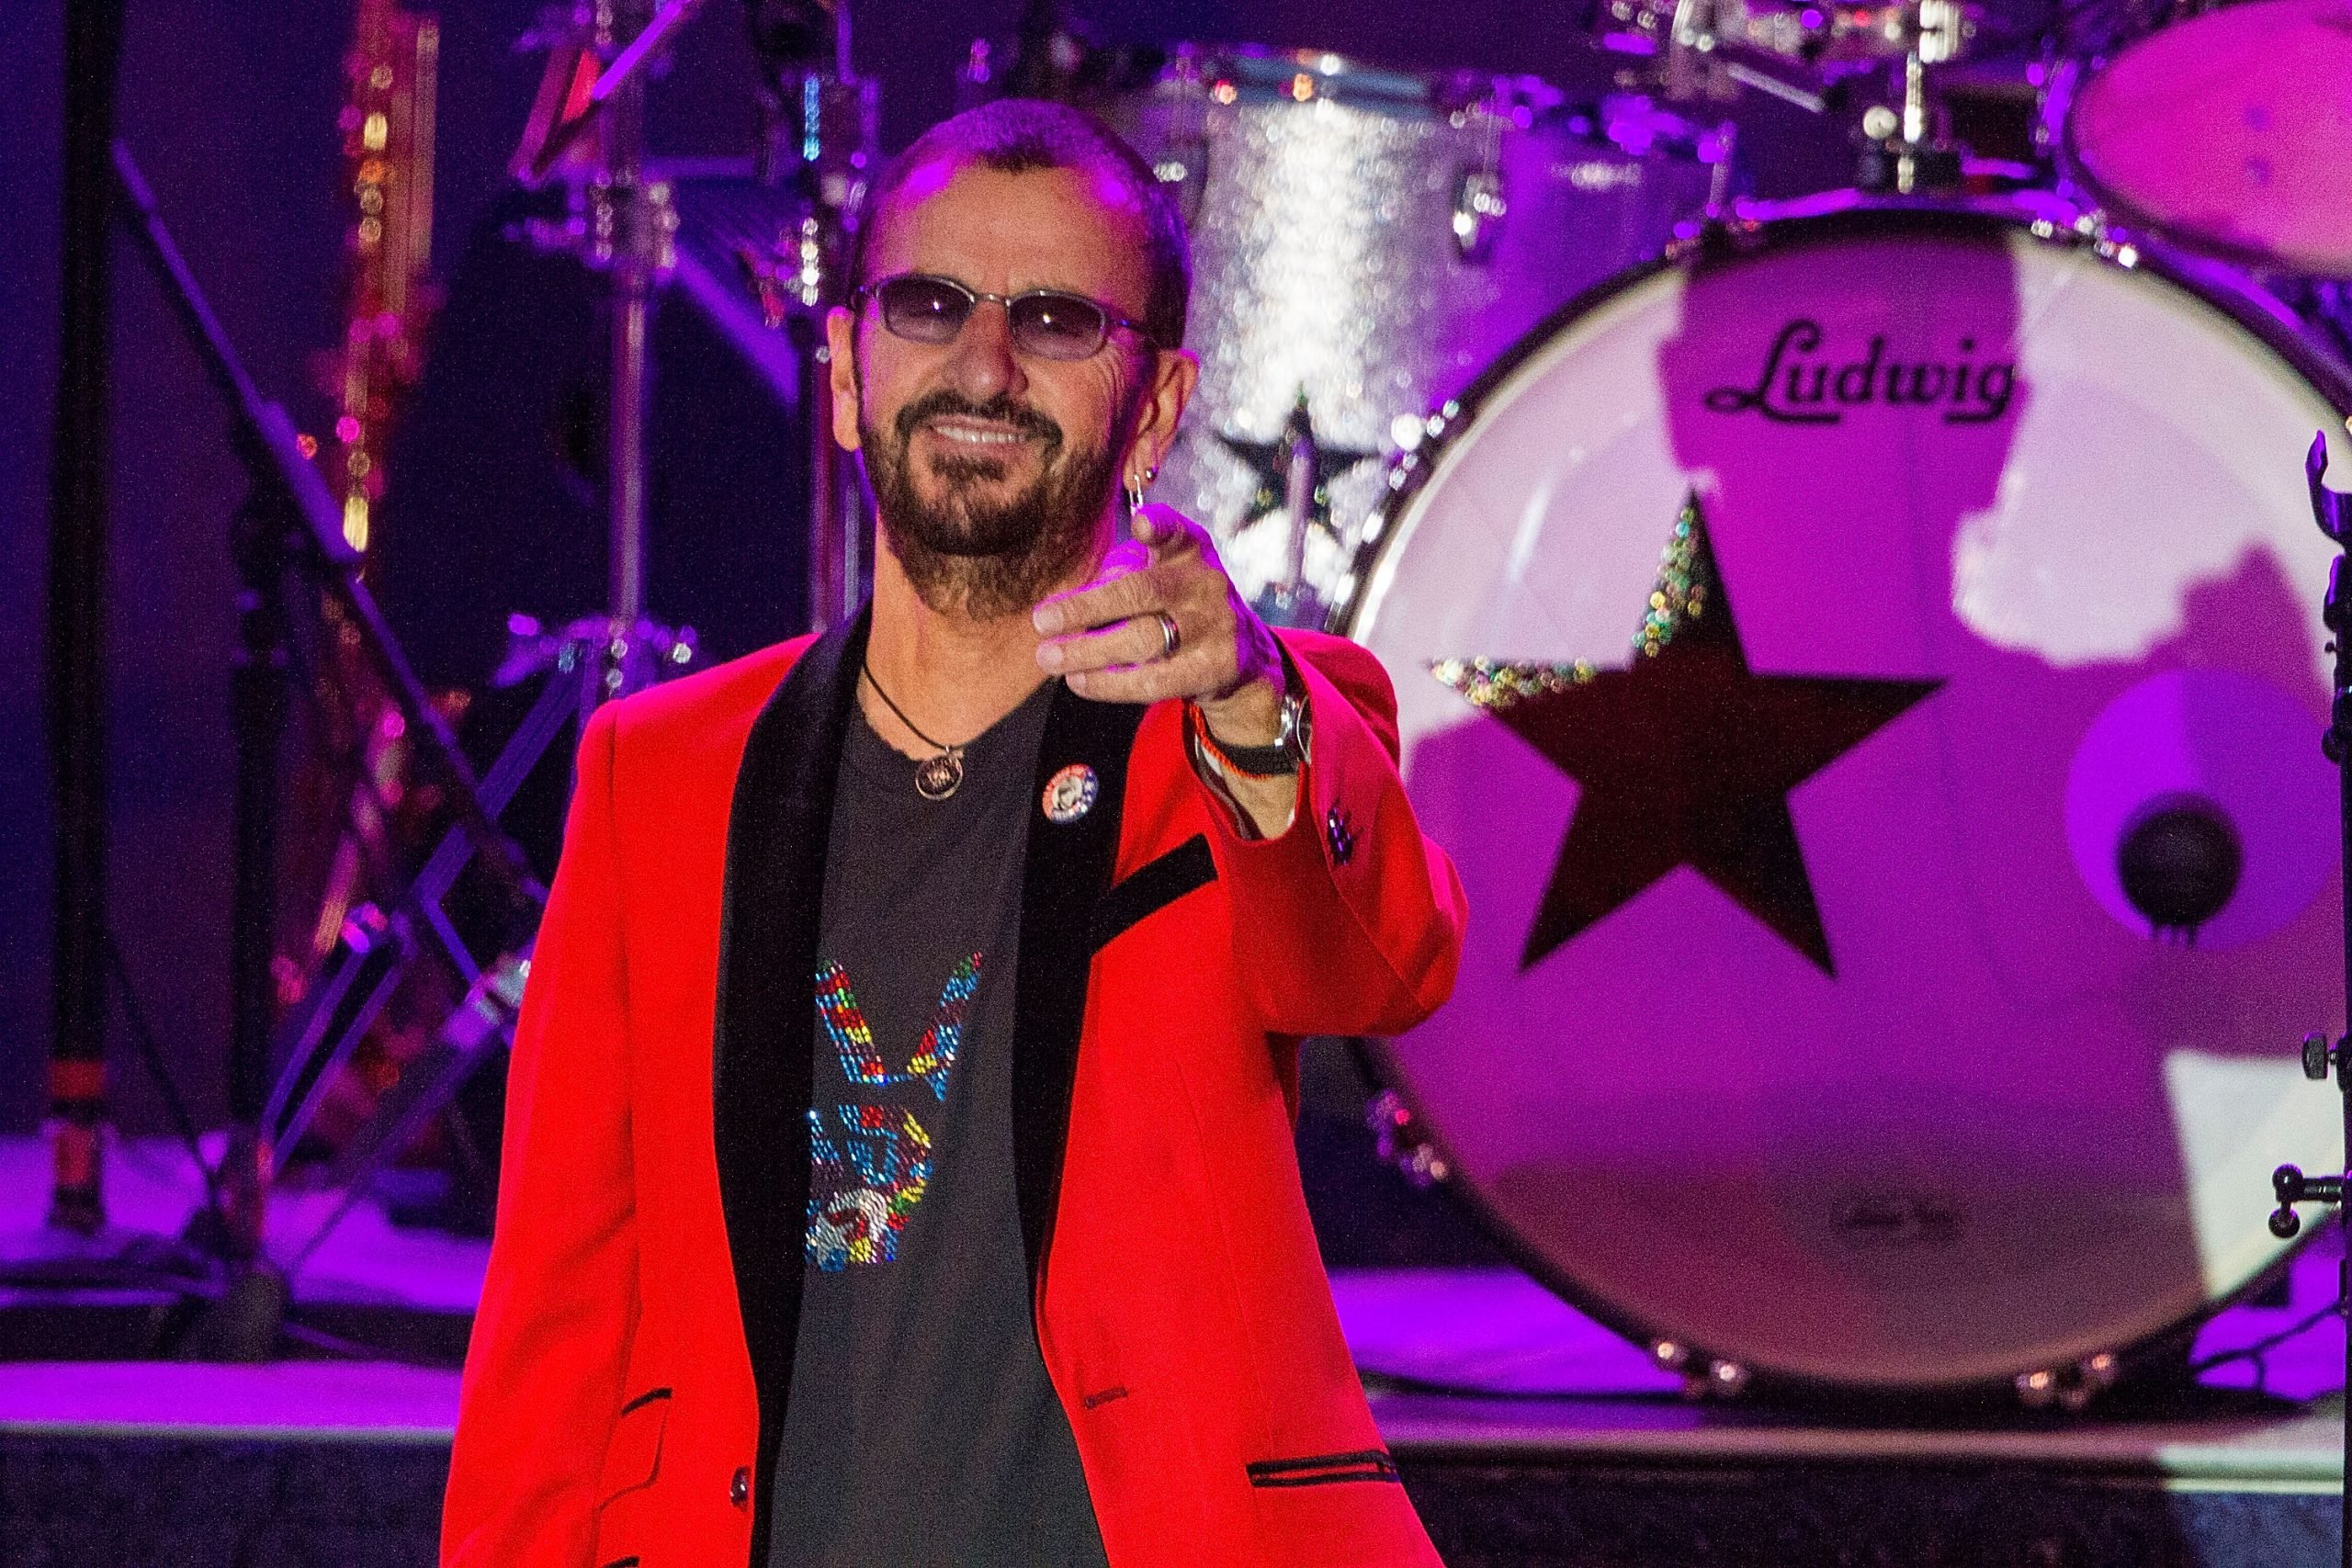 Ringo Starr wears a red jacket and T-shirt as he smiles and points out to the crowd from on stage in 2016.